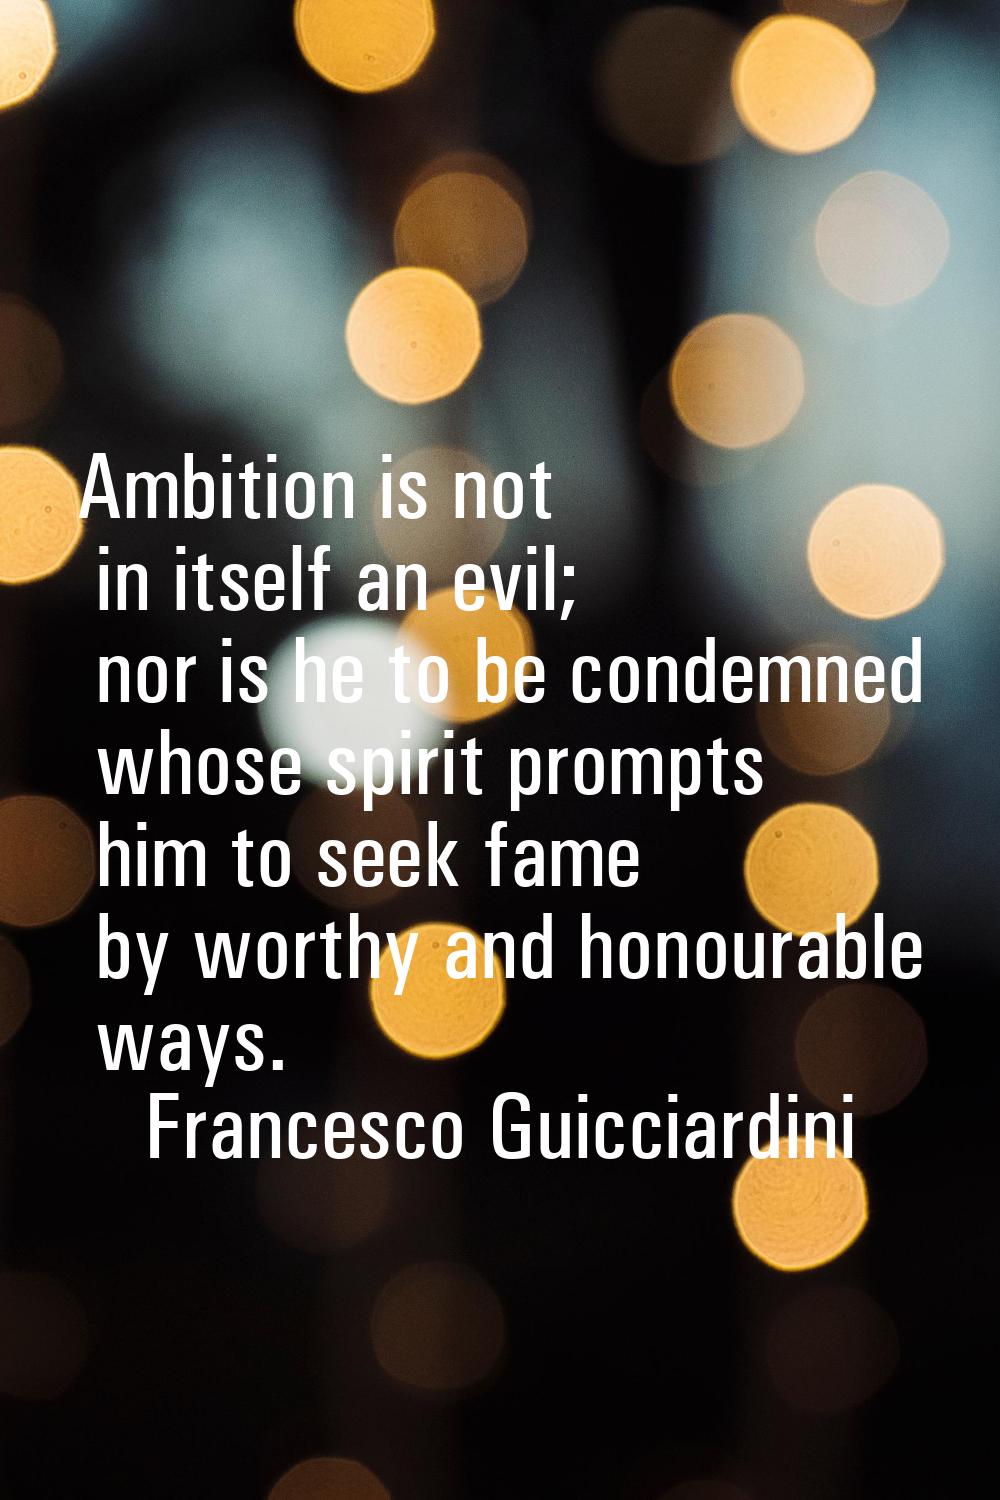 Ambition is not in itself an evil; nor is he to be condemned whose spirit prompts him to seek fame 